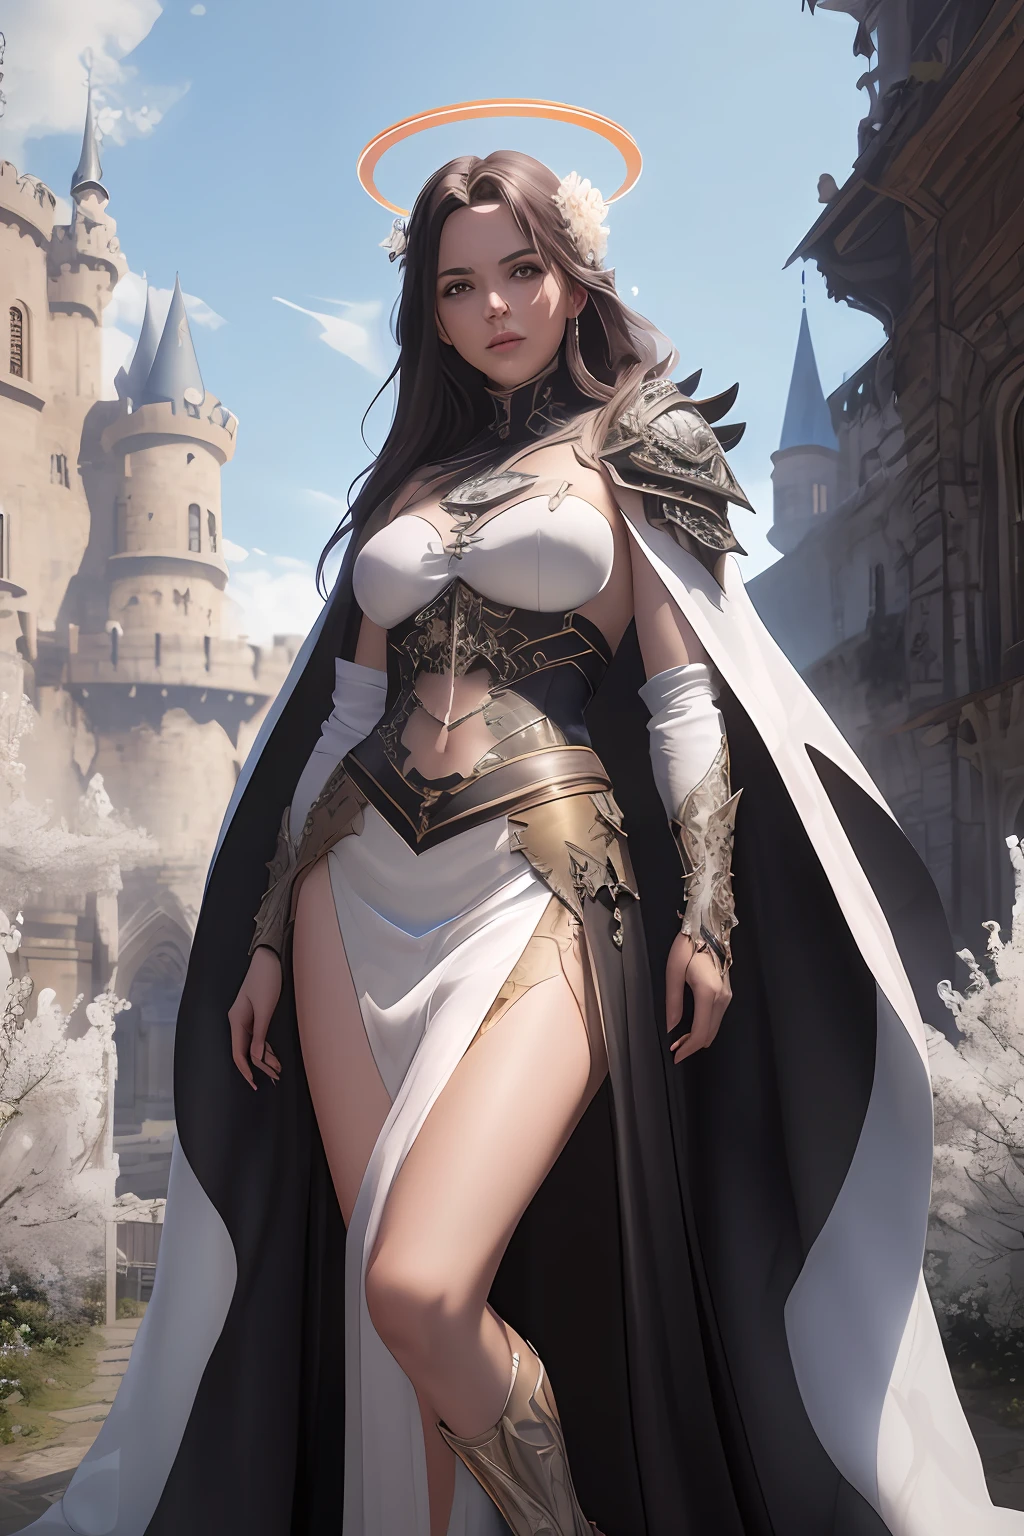 full body:1.6, walking pose, slow motion, (rogue thief:1.2) woman, multi-layered stitched,(white silk cloak), (intricately patterned cloth:1.2), (insanely detailed, flowering:1.5), (top quality, Alessandro Casagrande,
Greg Rutkowski, Sally Mann, concept art, 4k), (analog:1.2), (high sharpness), (detailed pupils:1.1), (painting:1.1), (digital painting:1.1), detailed face, eyes and body, masterpiece, best quality, (highly detailed photo:1.1), 8k, photorealistic, (long curvy hair, ecstasy:1.1), (young woman:1.1), by jeremy mann, by sandra chevrier, by maciej kuciara, sharp, (perfect body:1.1), realistic, real shadow, 3d, (europe castle background:1.2), (by Michelangelo), angel of death, innocent,  eyes, diadem, angel wings, black clothes, full body, arms behind back, sky, halo, post-apocalypse, detailed armor